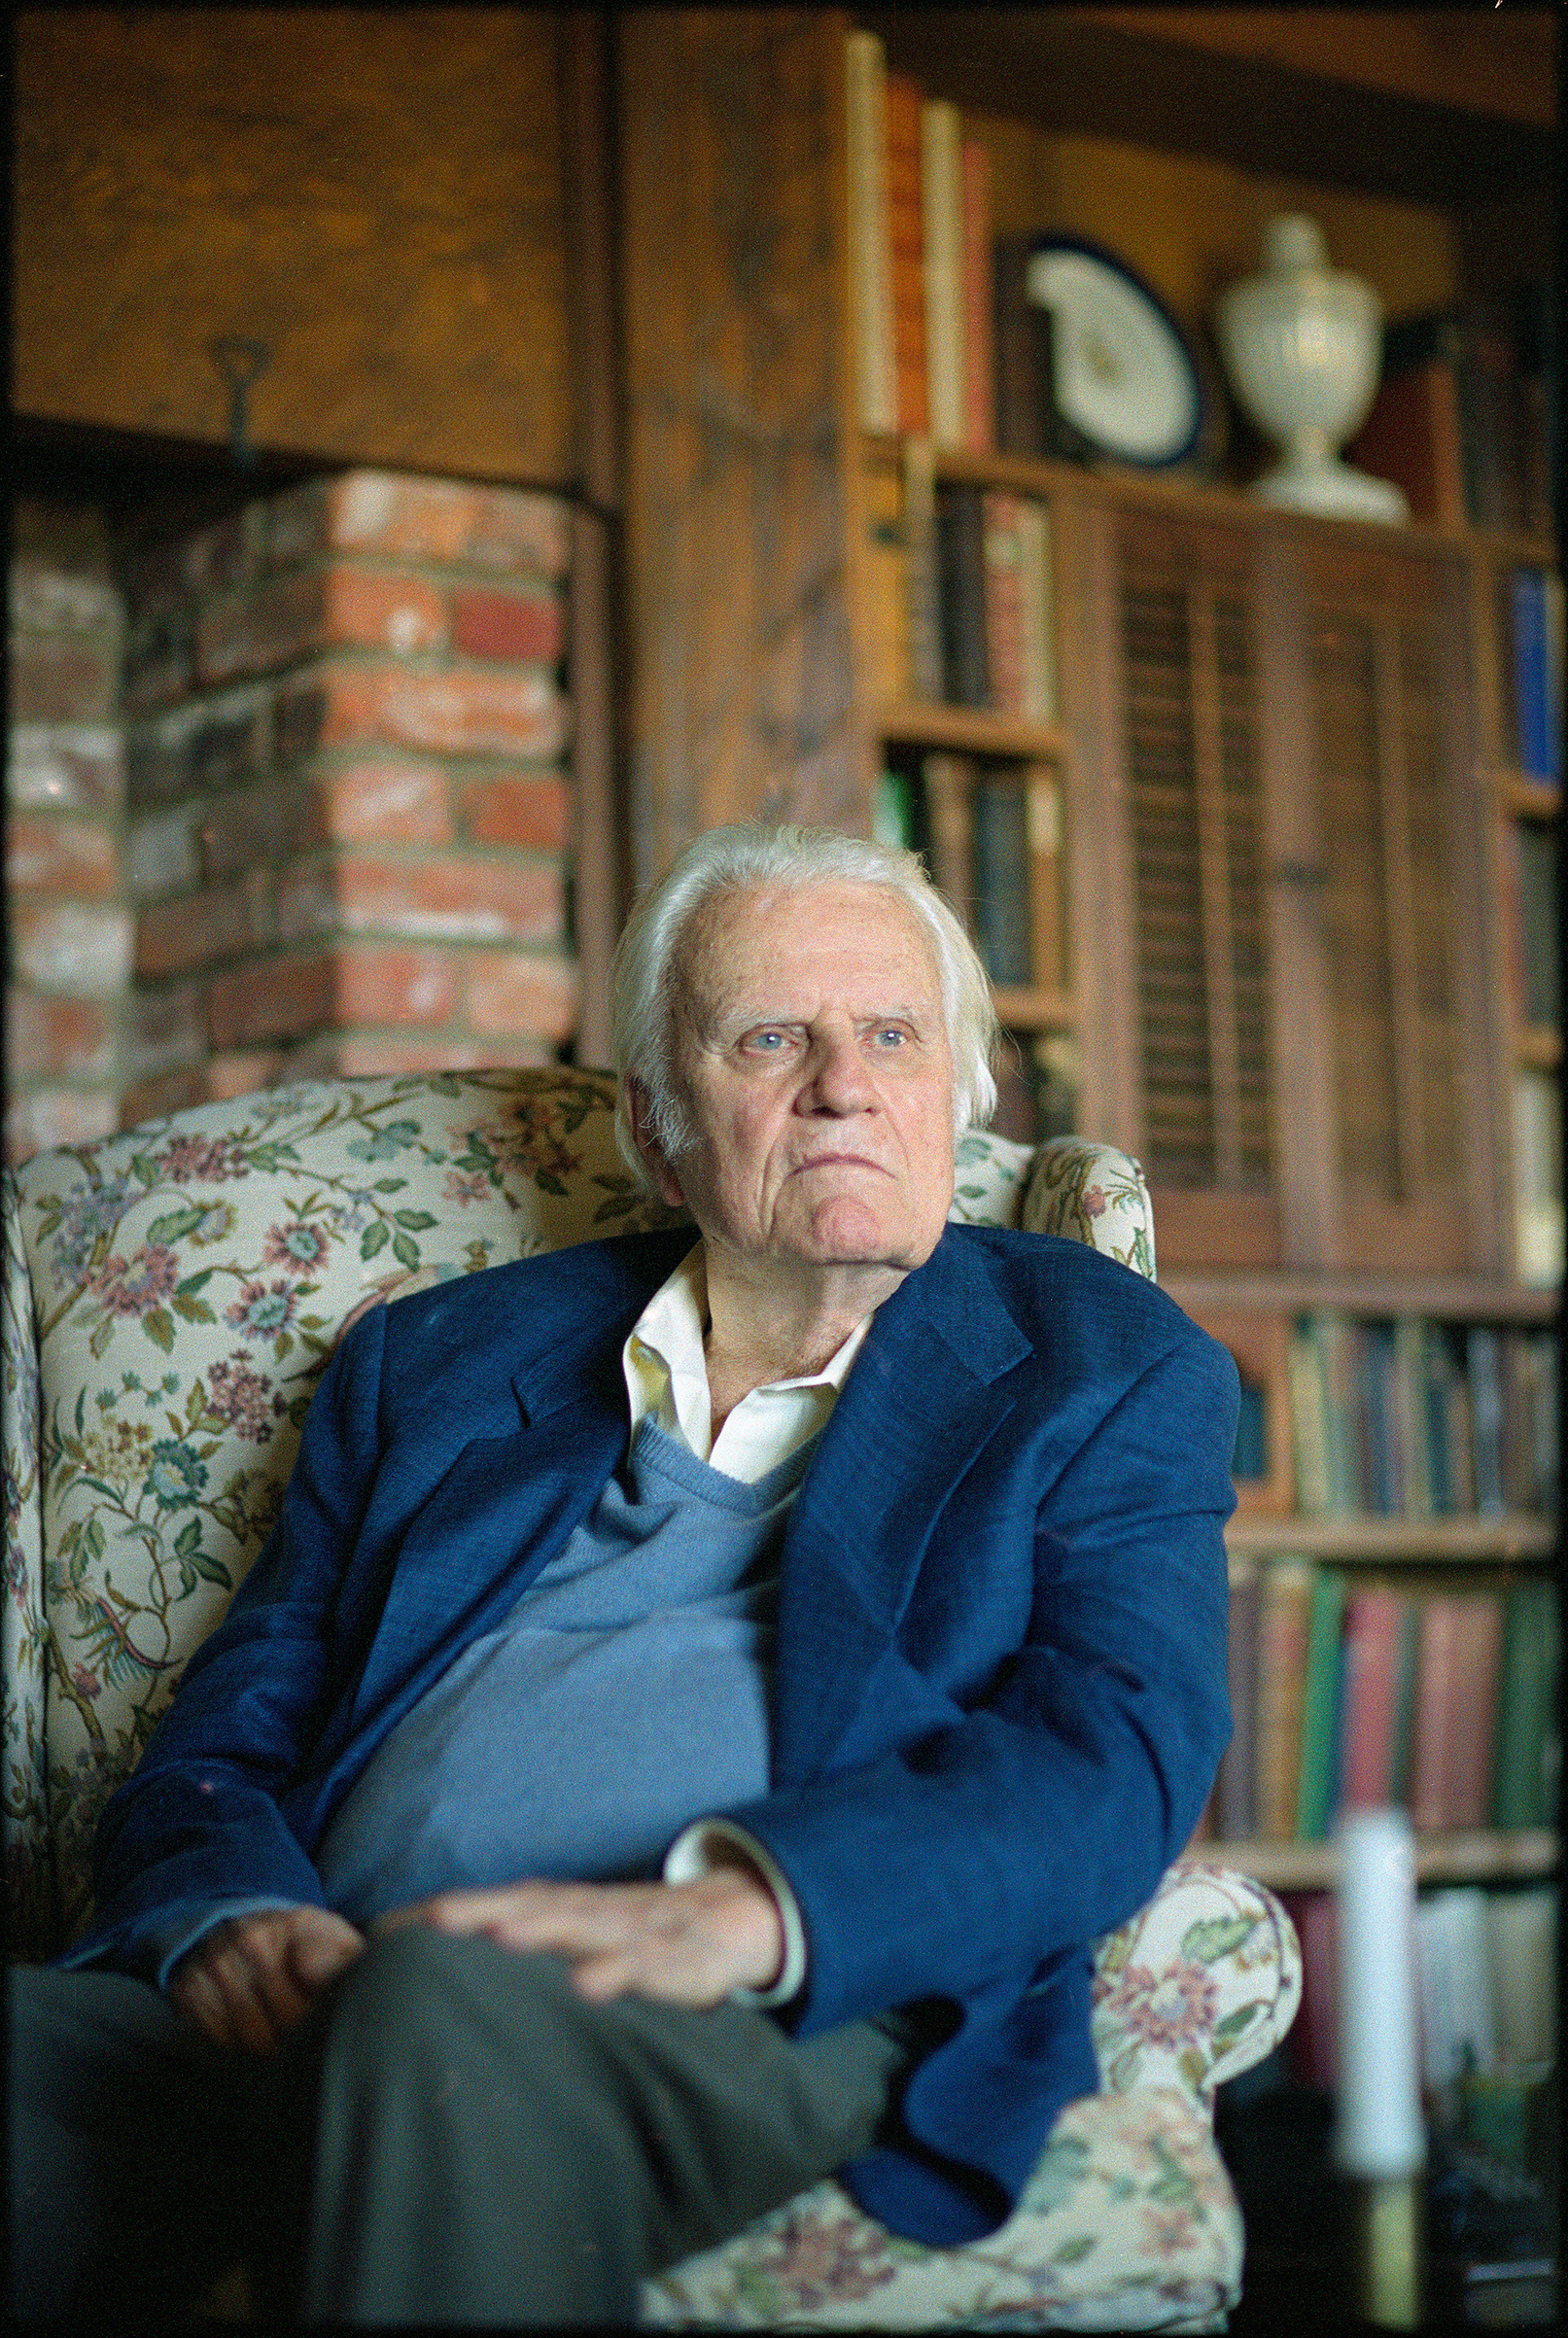 The Rev. Billy Graham at his home in Montreat, N.C. in 2007. (Diana Walker for TIME)